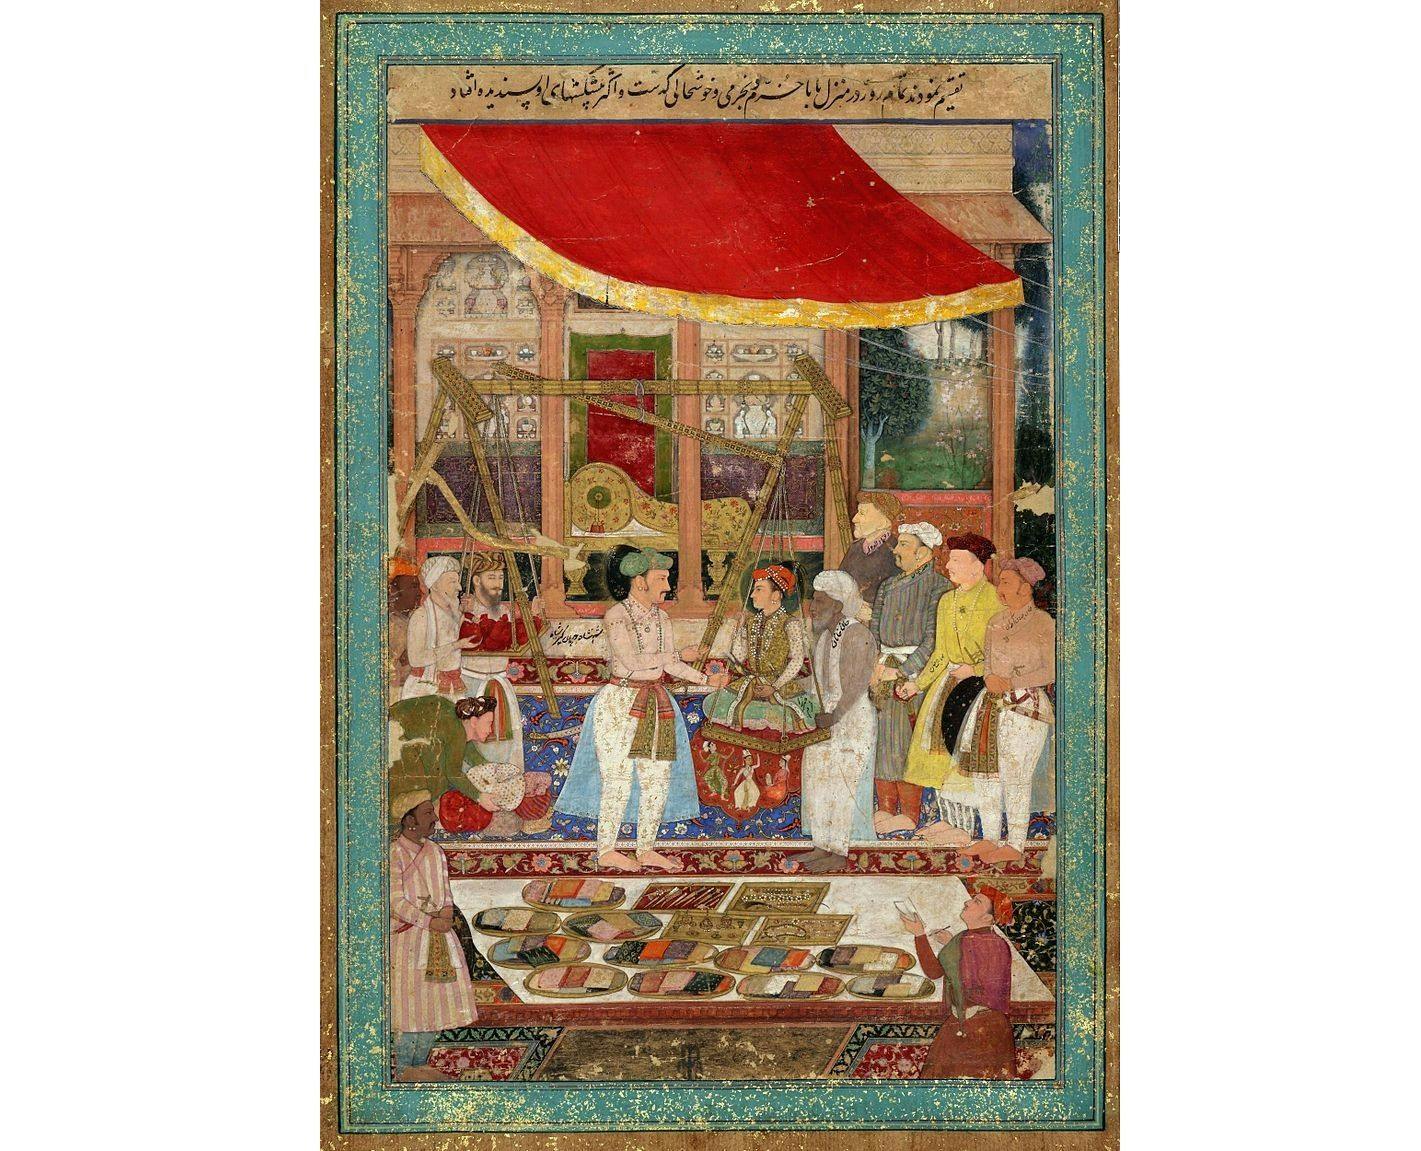 Jahangir weighing prince Khurram (later Shah Jahan) against gold and silver